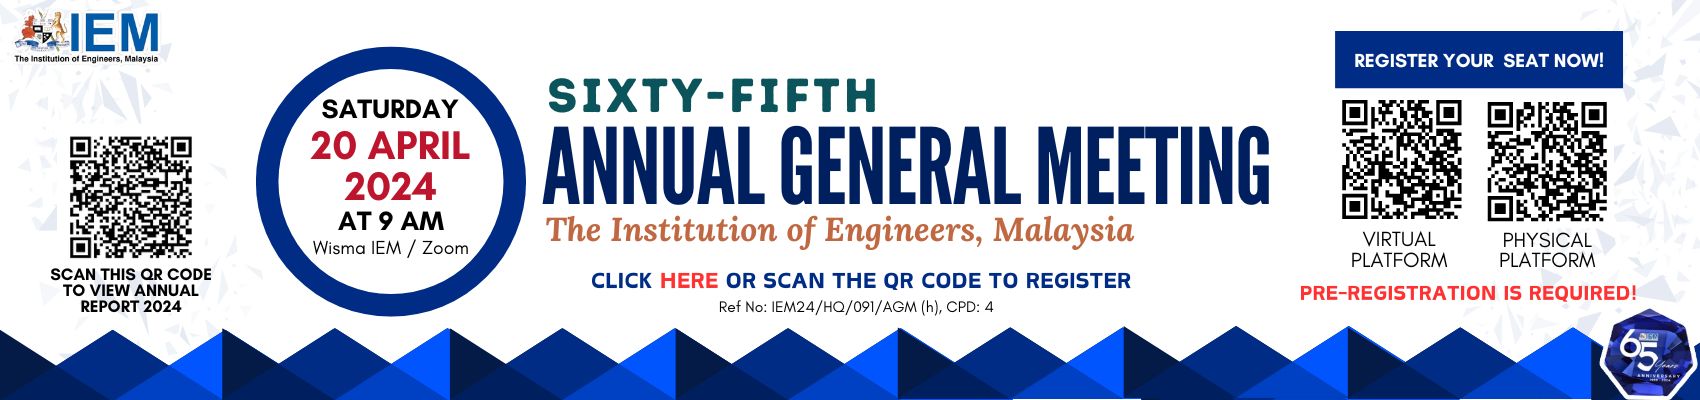 65th Annual General Meeting of The Institution of Engineers, Malaysia